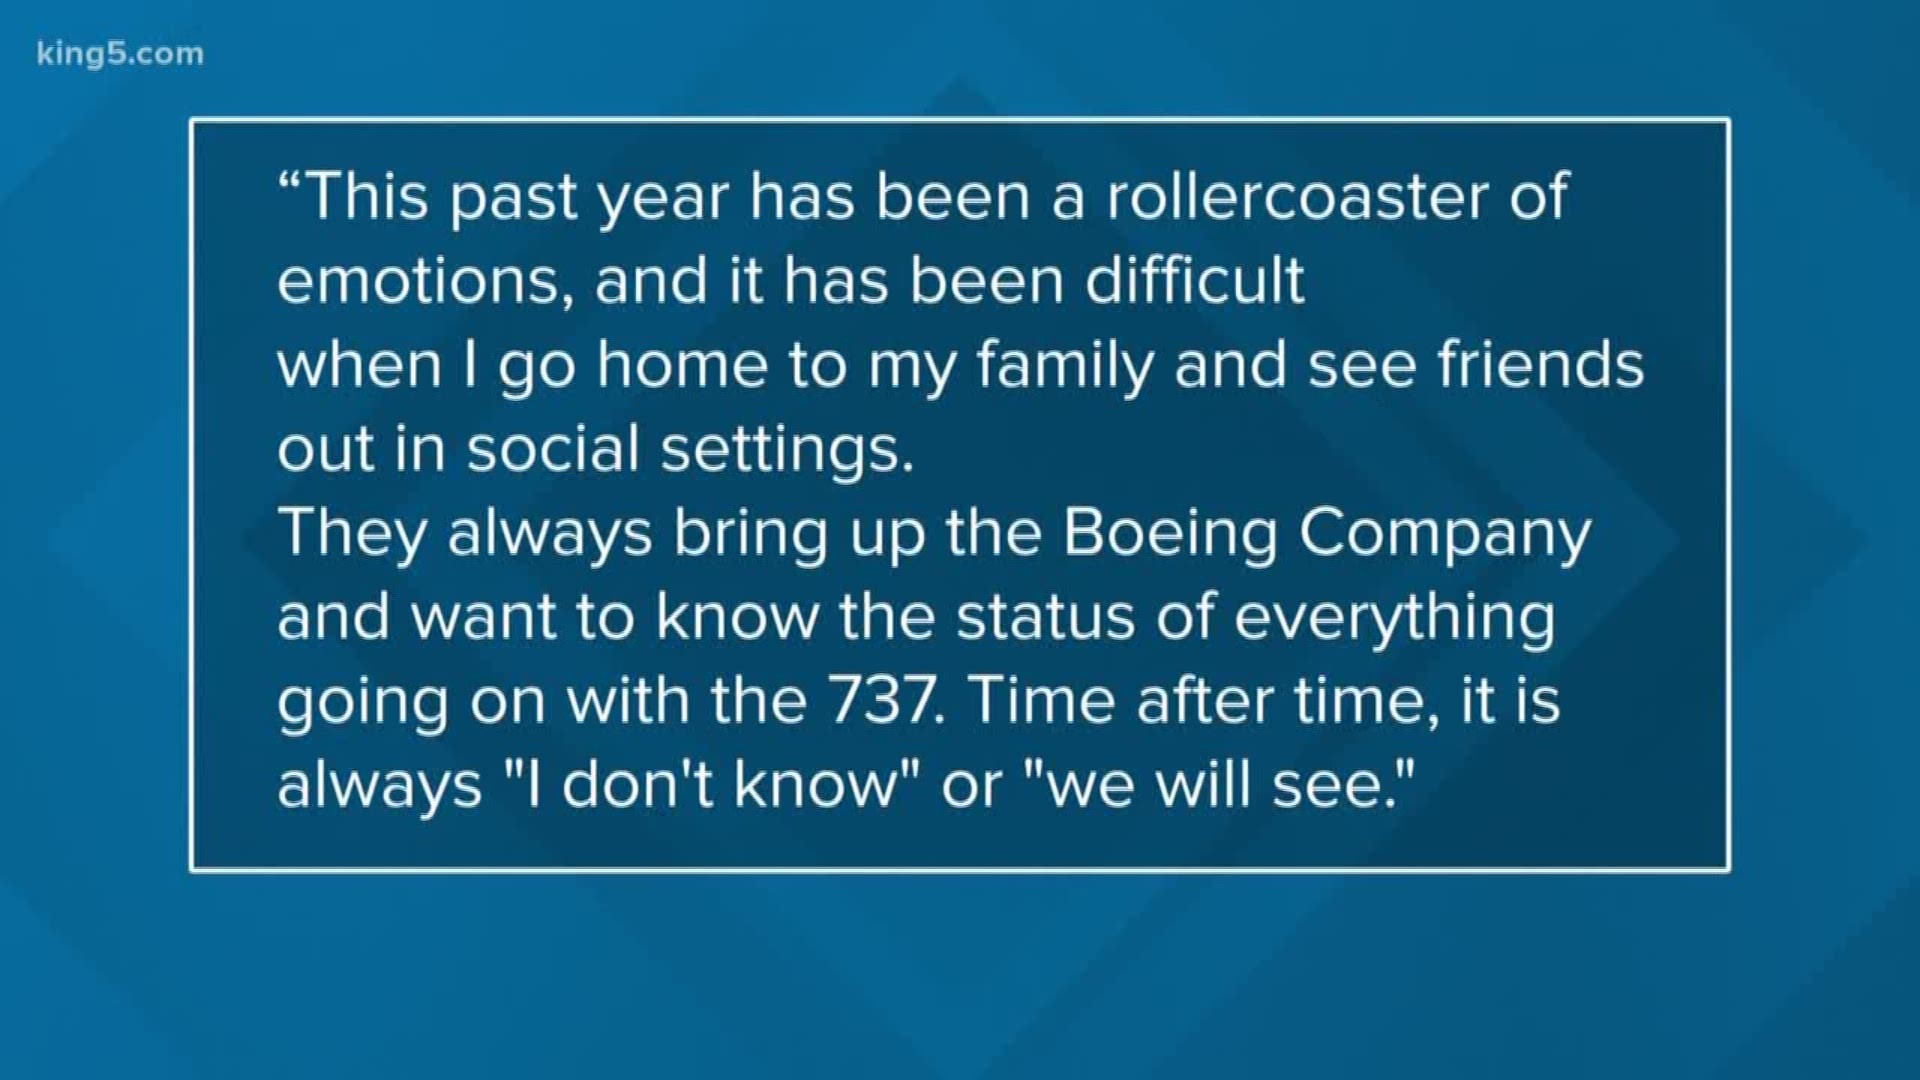 One employee wrote an OpEd into KING 5 about the culture at Boeing.